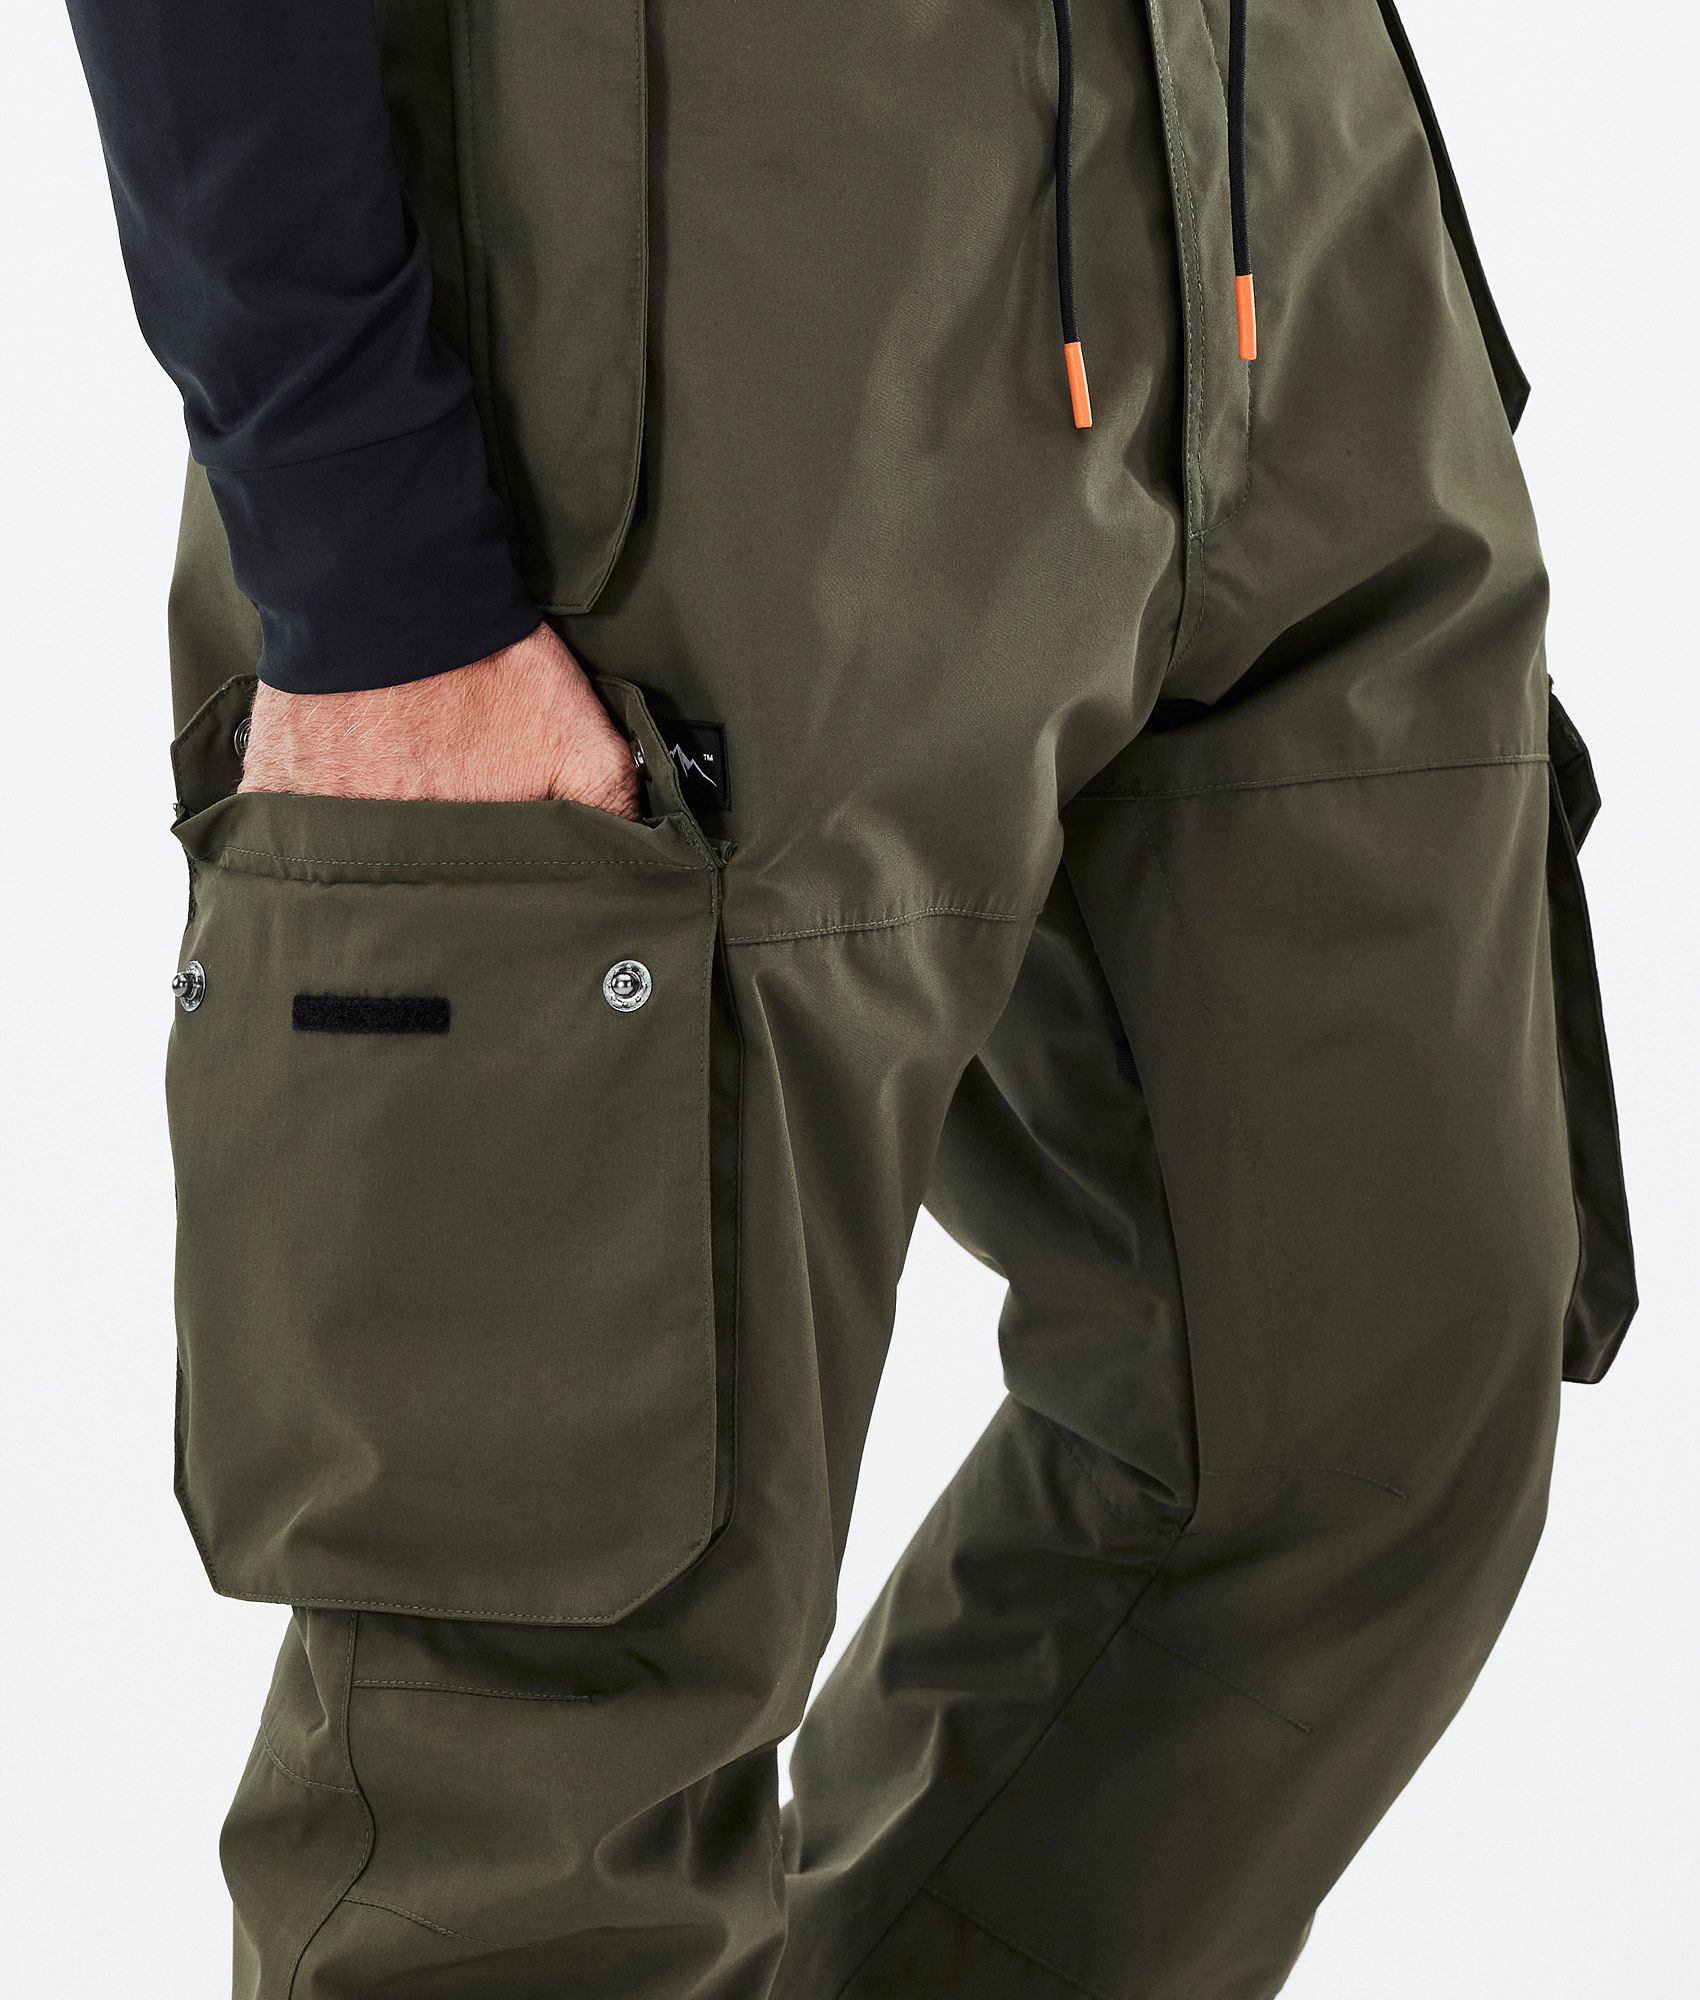 Green Trousers for men: Well-dressed for every occasion | ZALANDO